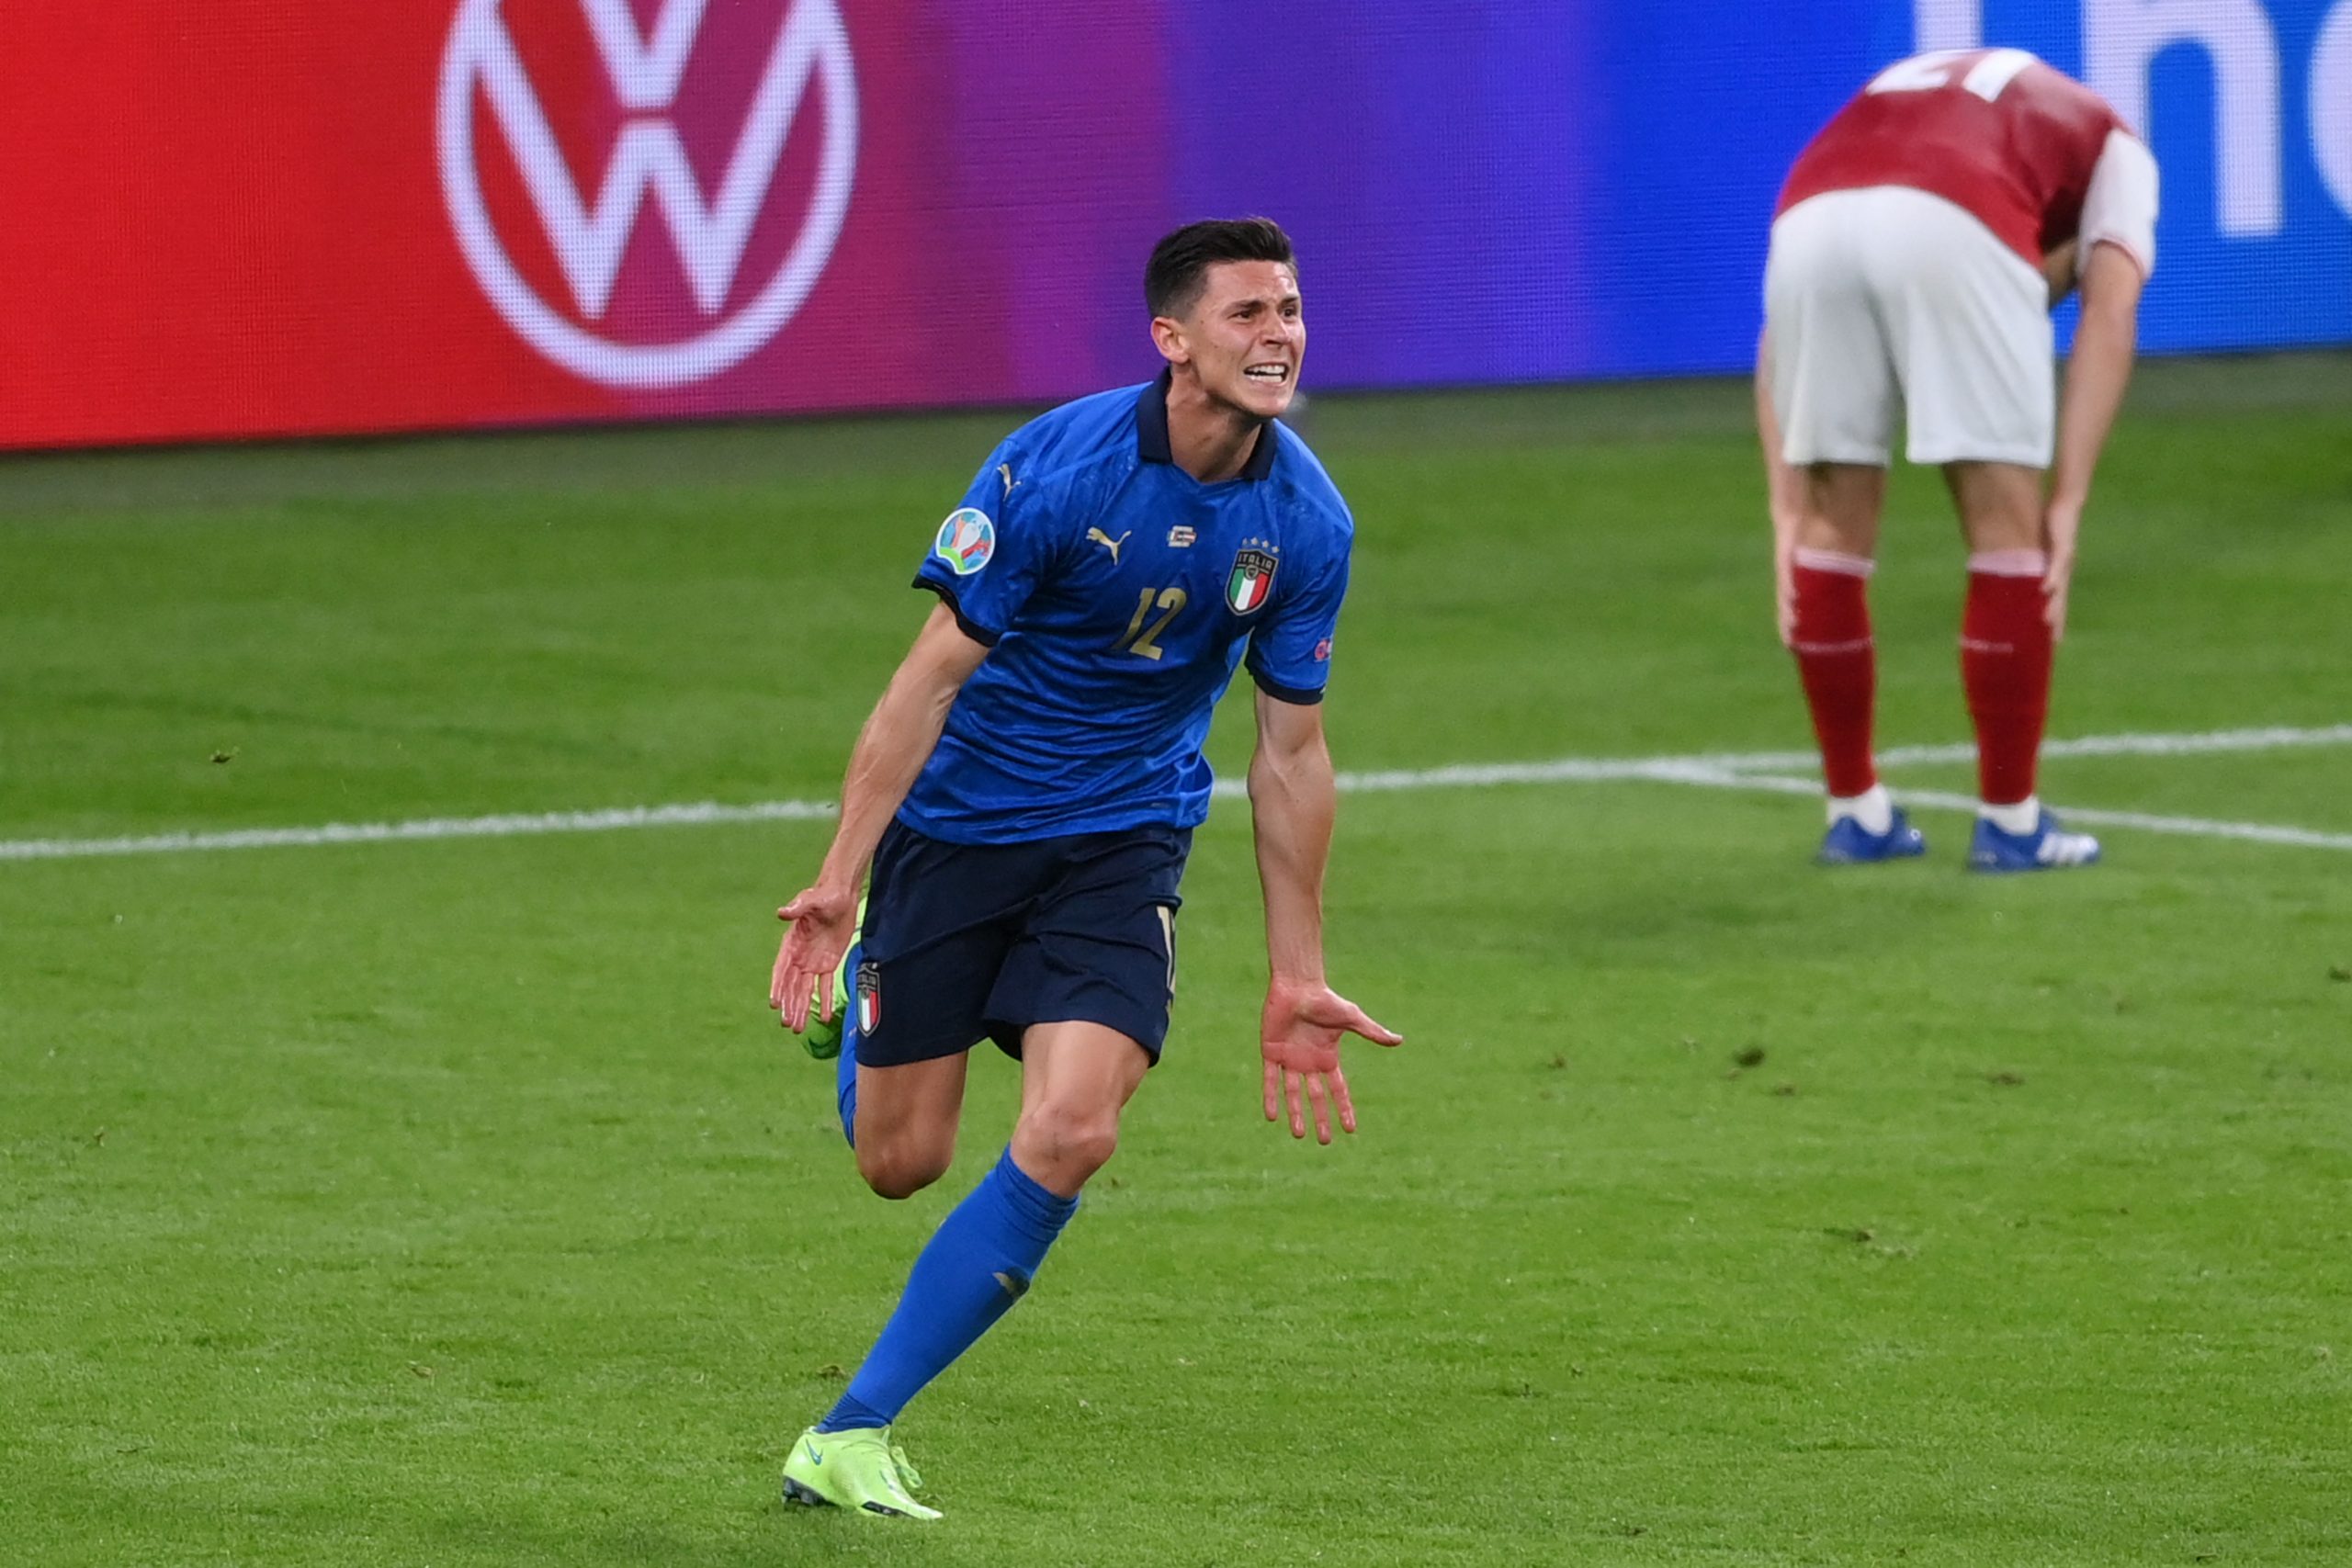 Euro 2020: Italy through to last 8 after extra-time thriller against Austria